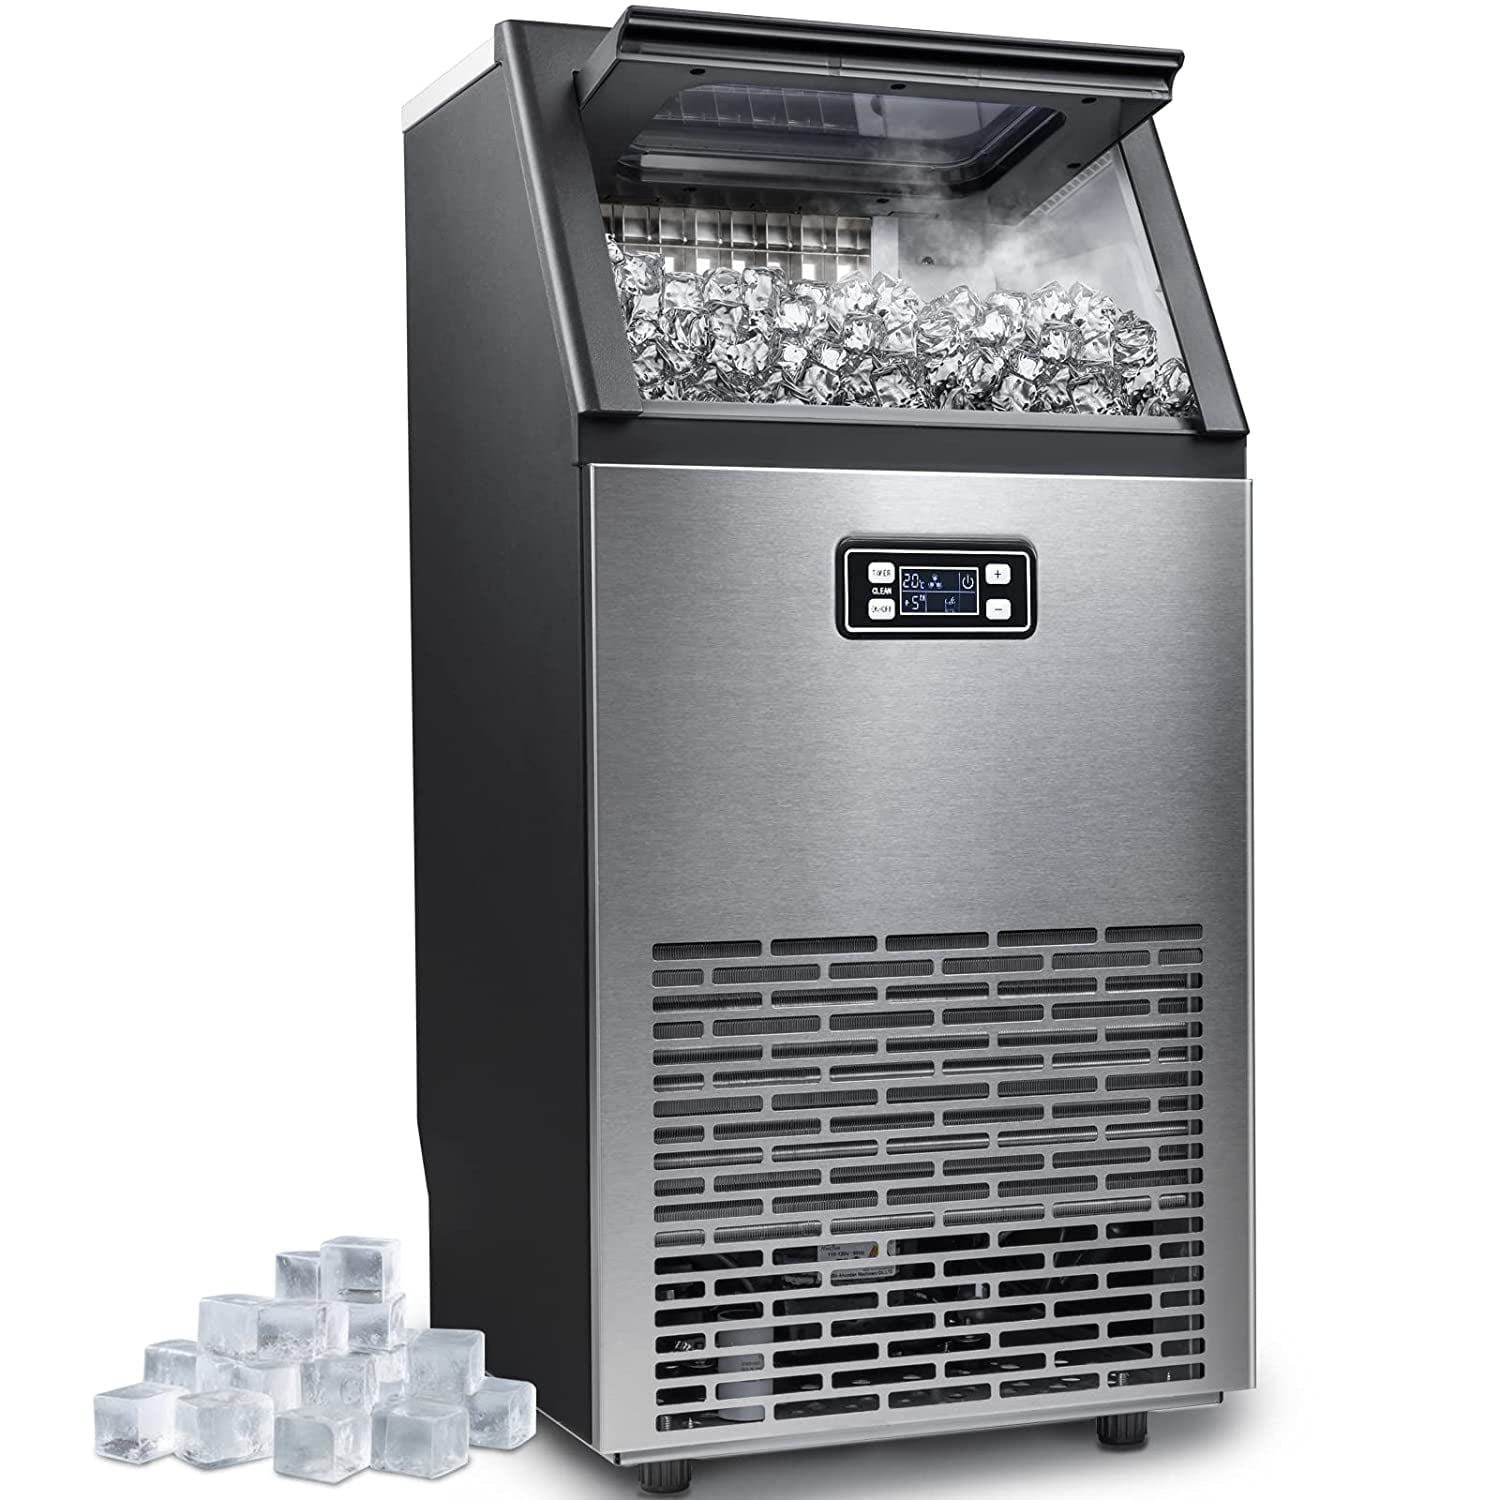 KISSAIR Commercial Ice Maker,Stainless Steel Freestanding Ice Maker with 2 Self-Cleaning,100Lbs/Day,45 Cubes/Batch in 11-20 Mins